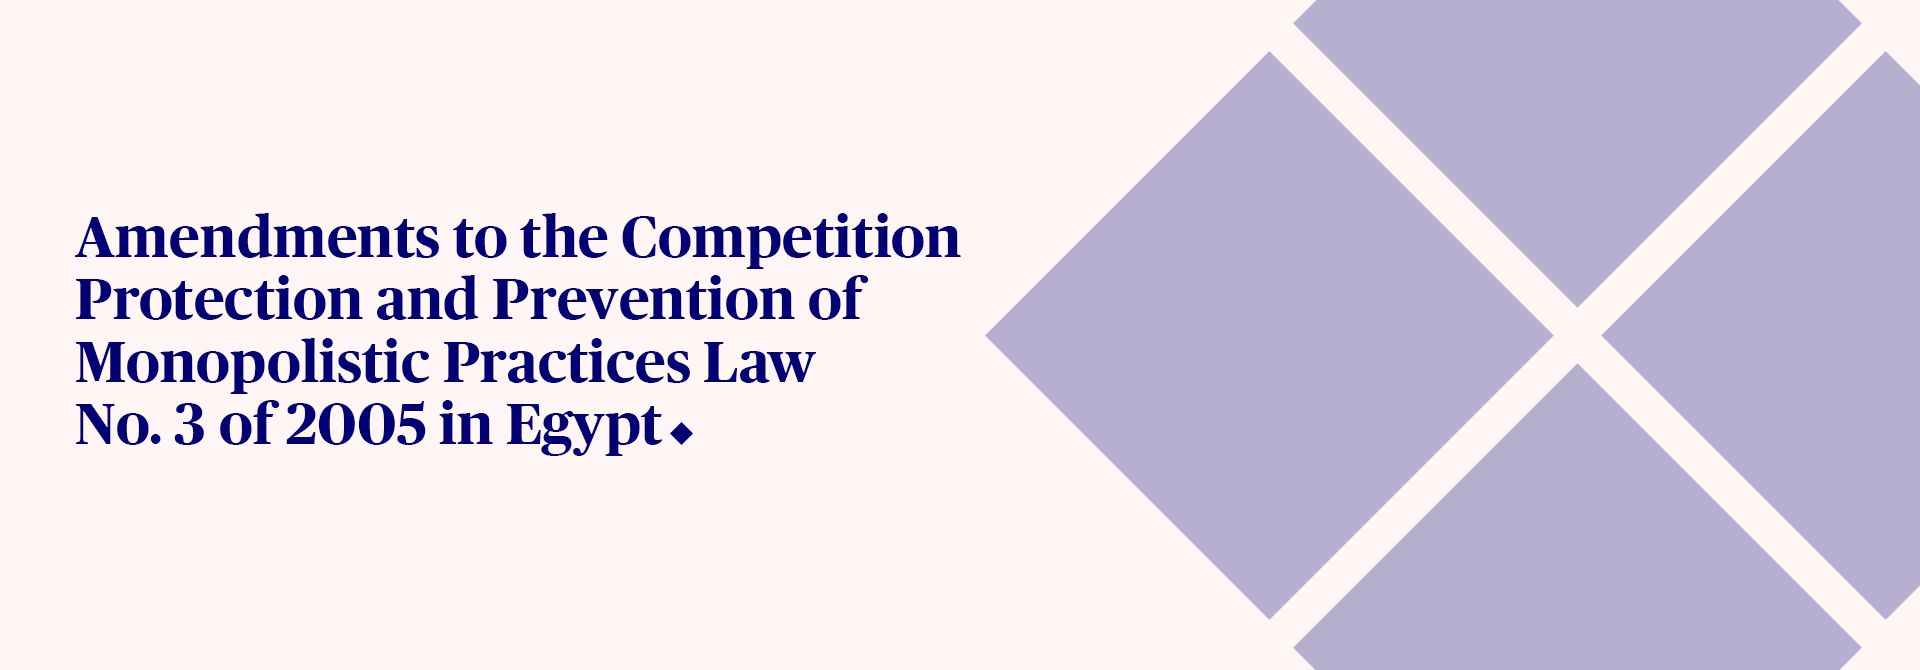 Amendments to the Competition Protection and Prevention of Monopolistic Practices Law No. 3 of 2005 in Egypt